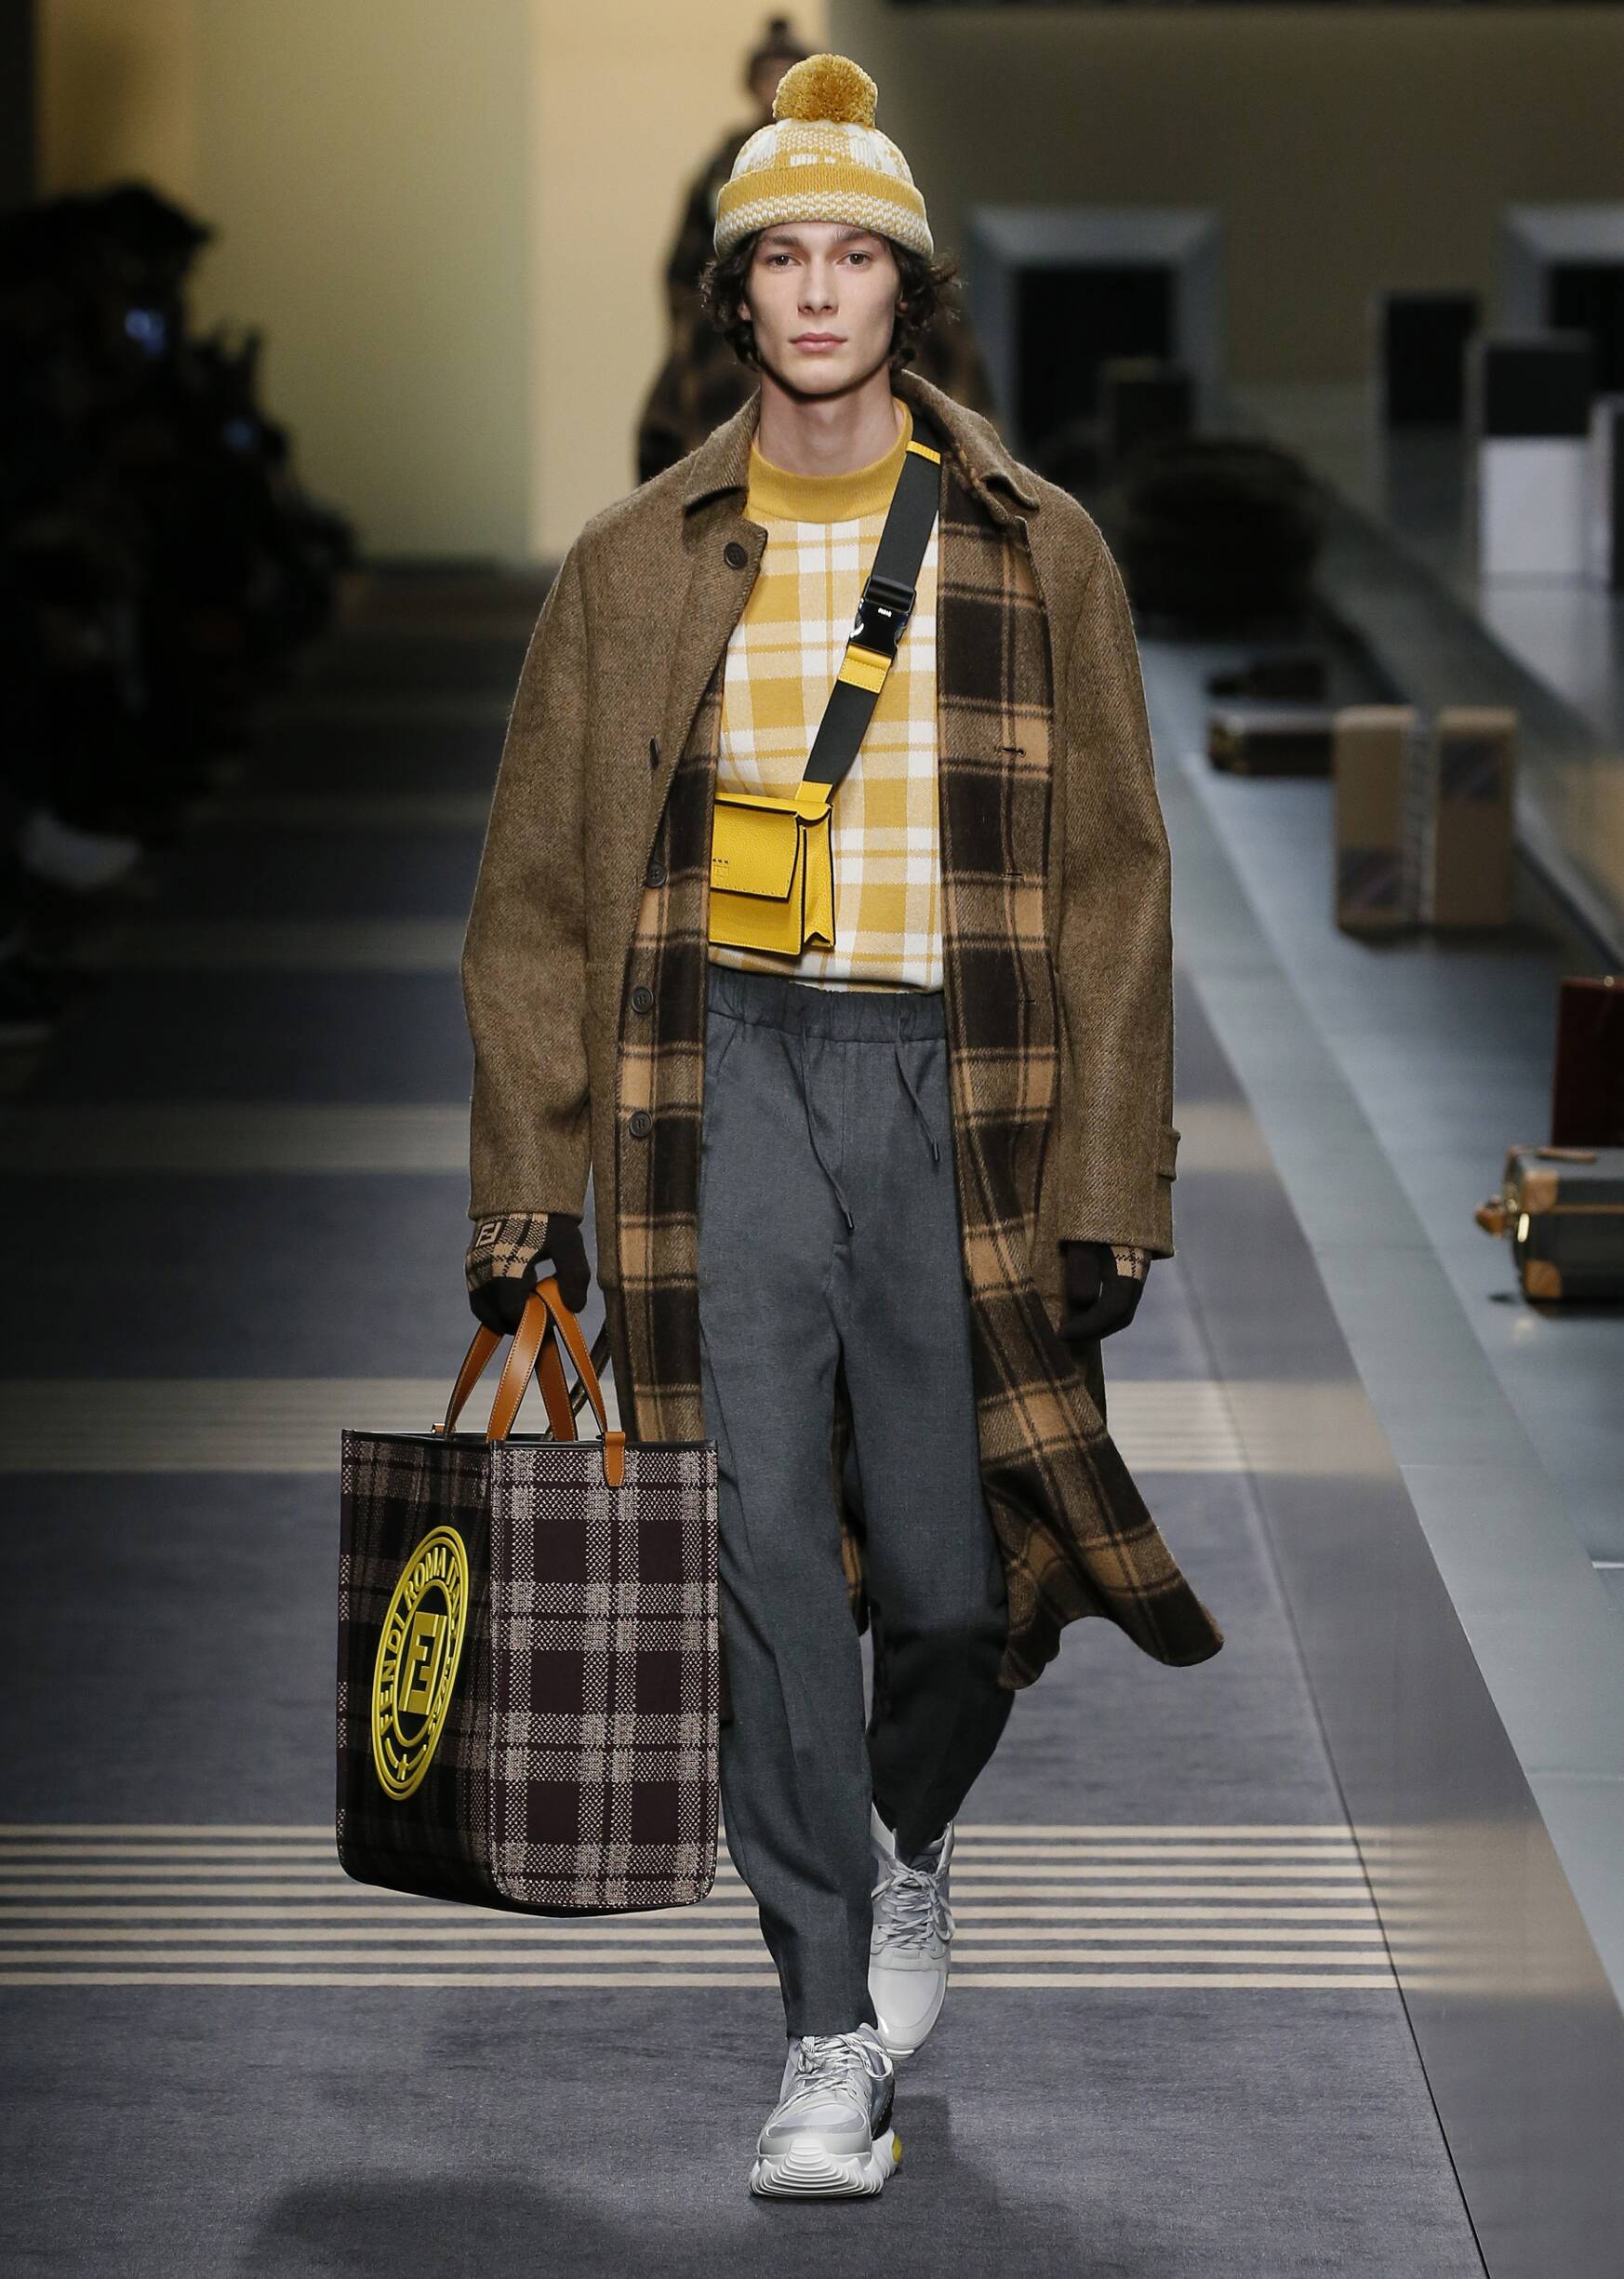 FENDI FALL WINTER 2018 MEN’S COLLECTION | The Skinny Beep